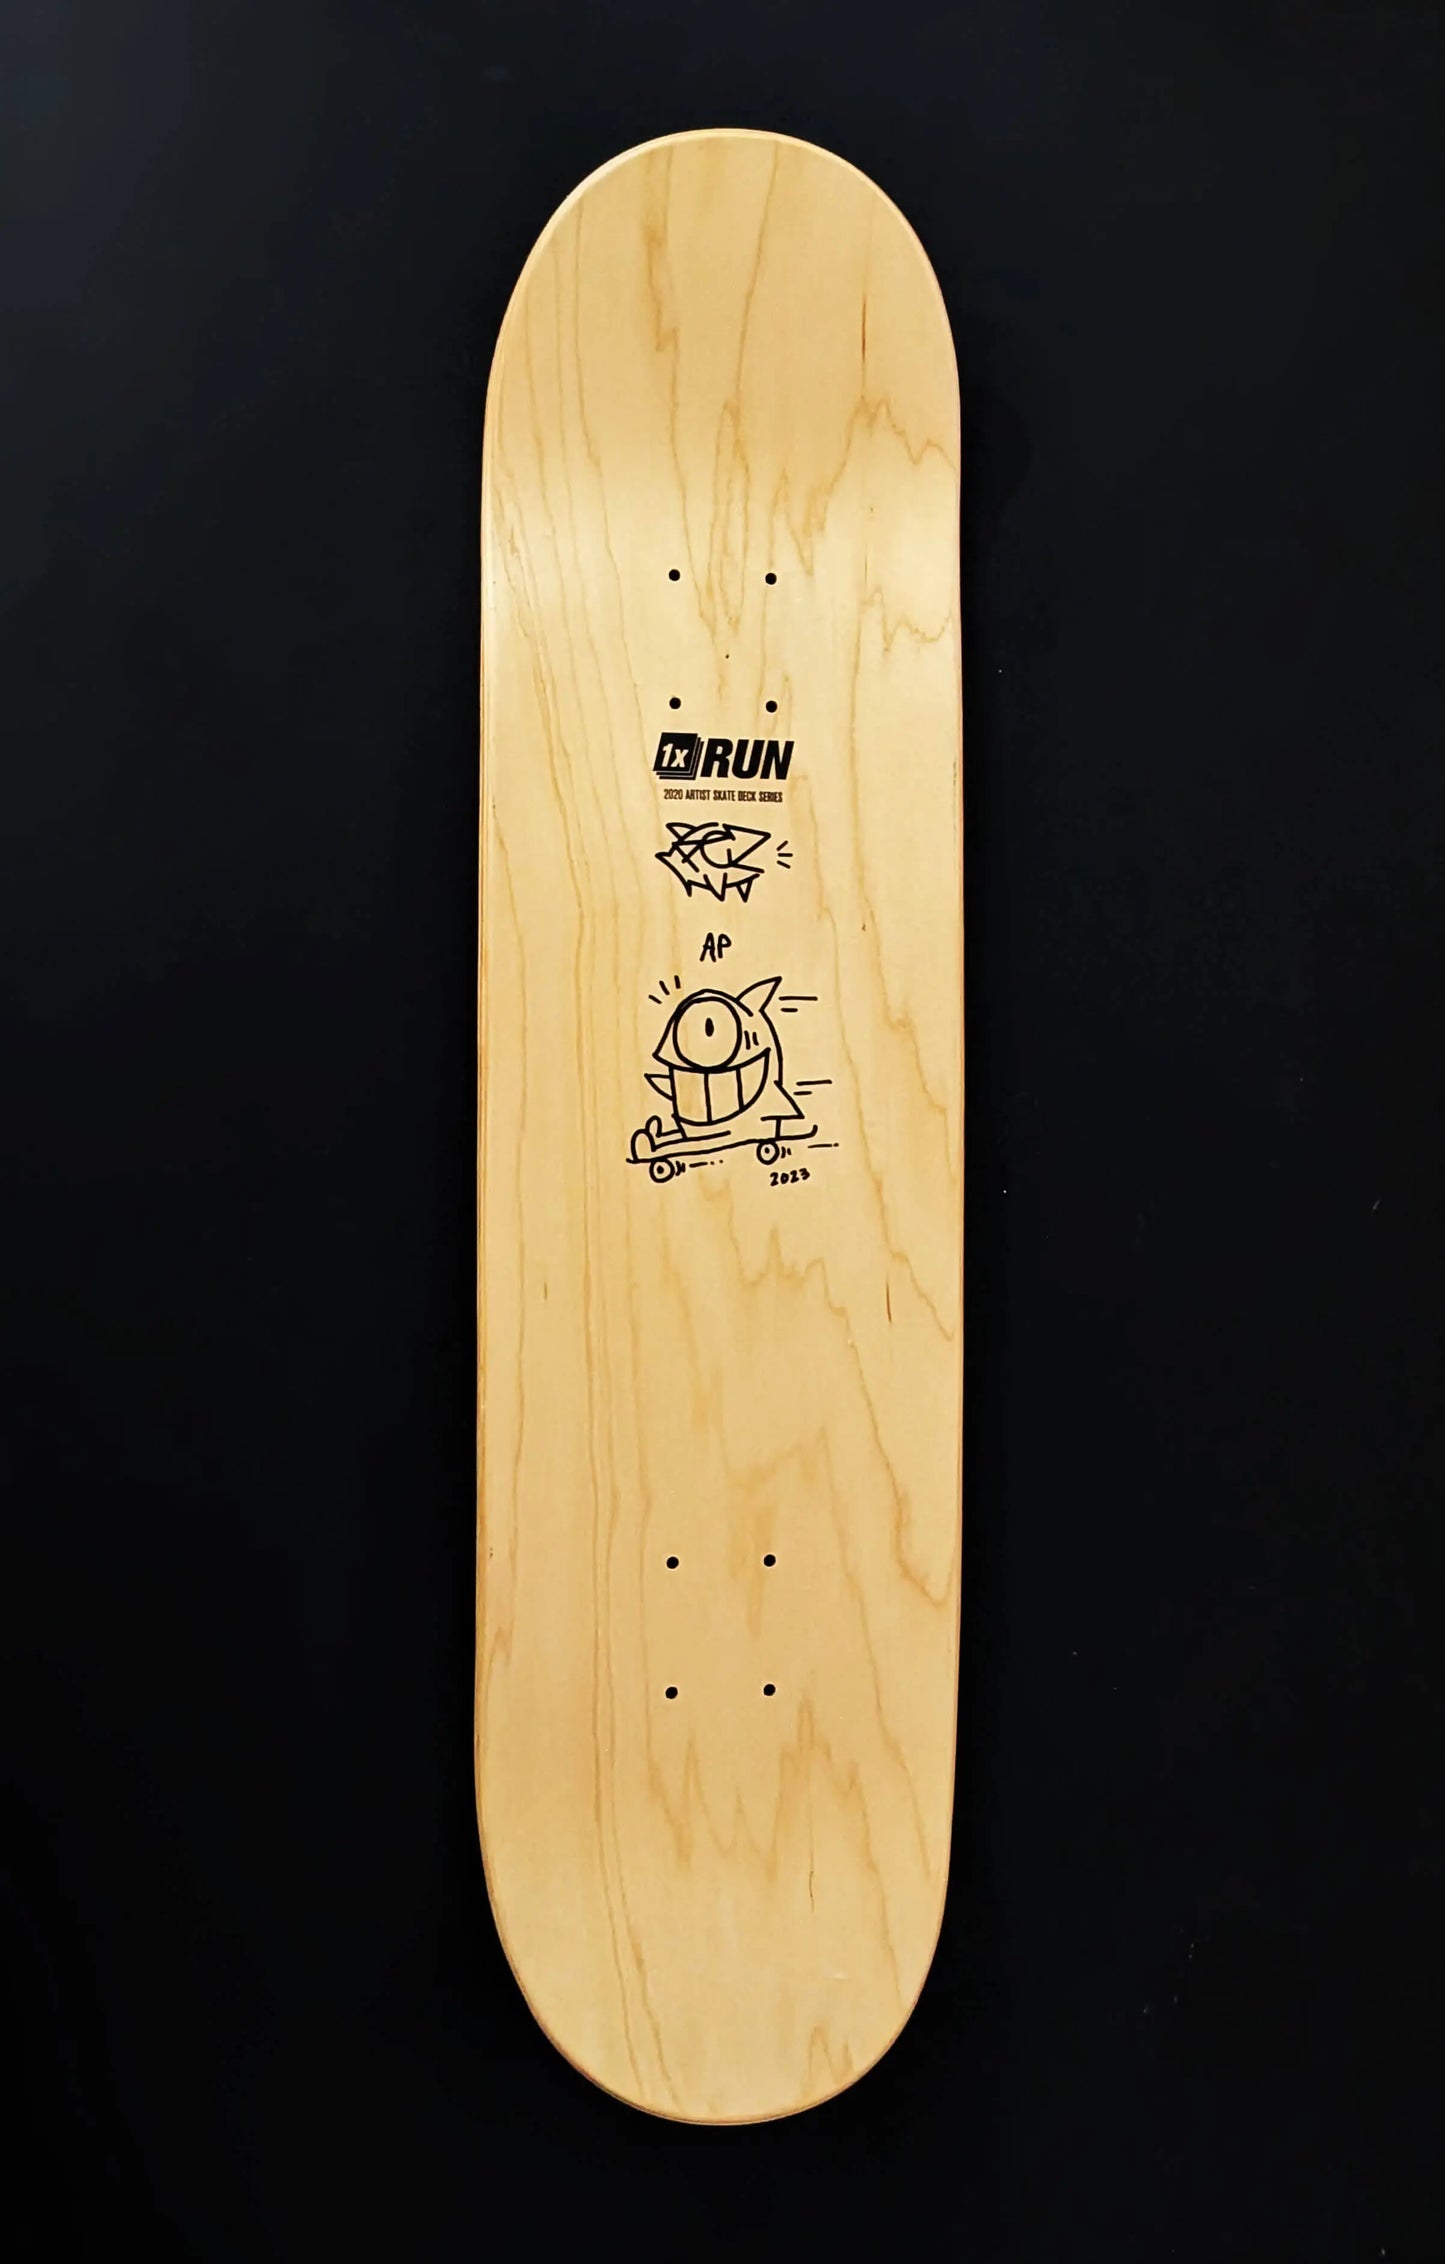 Pez Skate Deck with Augmented Reality "20 Years Smiling" (Variant 3) front